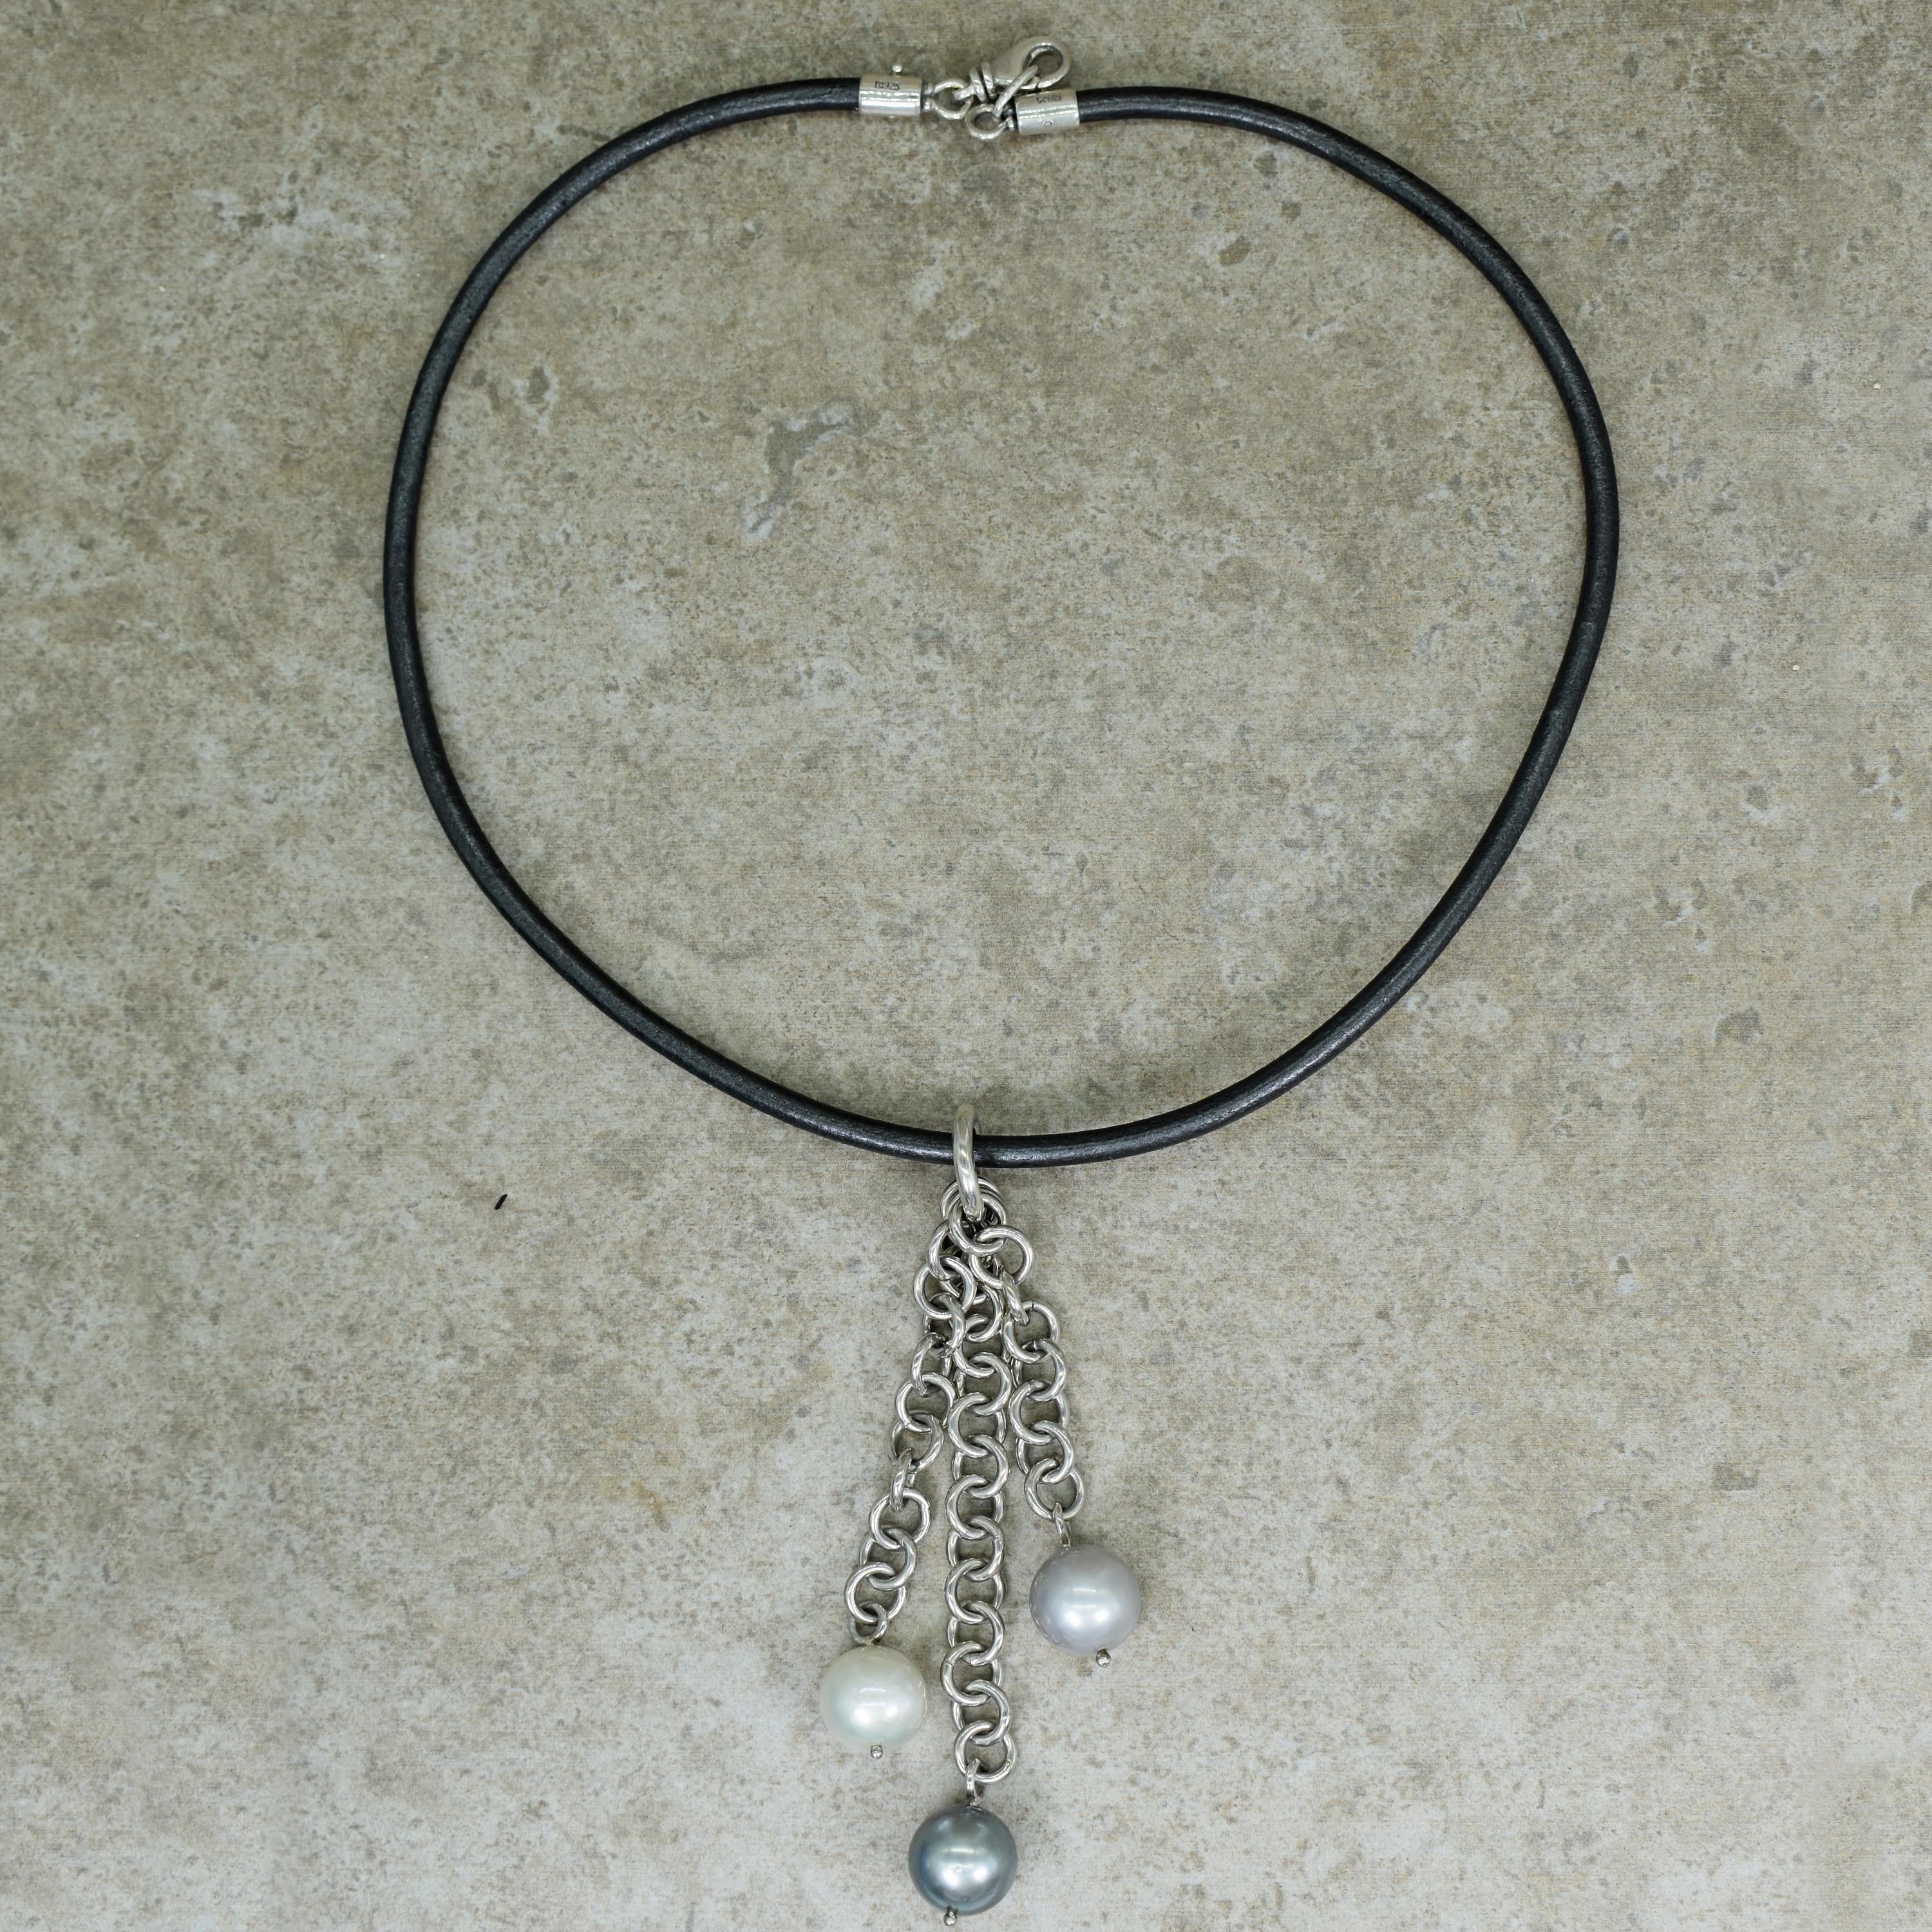 White, Gray and Tahitian Pearl 3-strand sterling silver chain dangle pendant on black leather cord necklace. Pearls are approximately 13mm in diameter. Leather necklace is 19 inches in length, and the longest chain Pearl drop in the pendant is 4.25